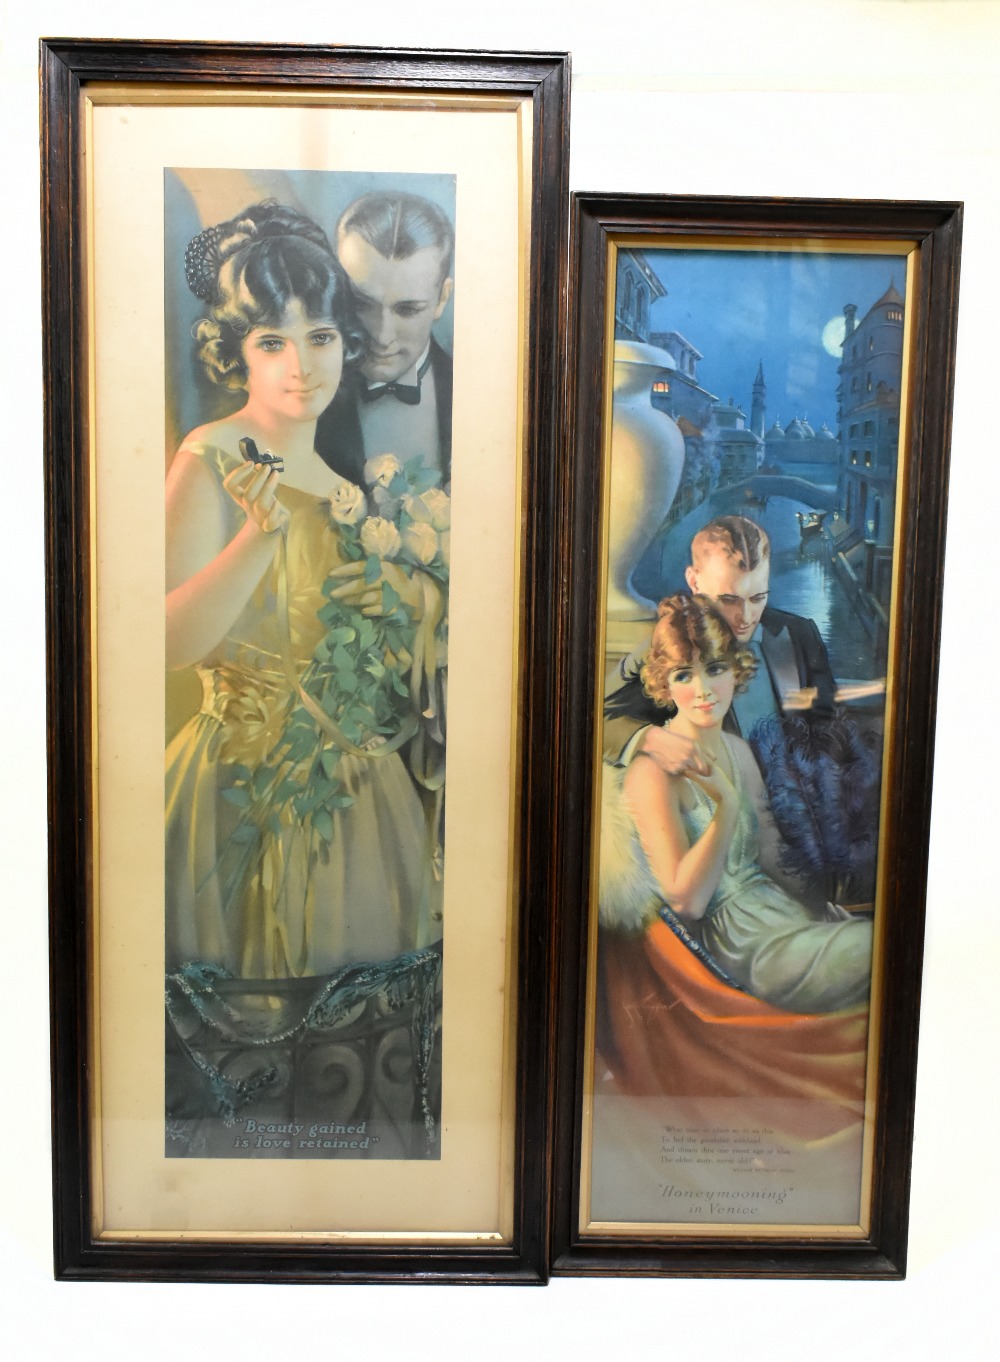 Two French Art Deco prints, 'Honeymood in Venice' and 'Beauty Gained is Love Retained', larger